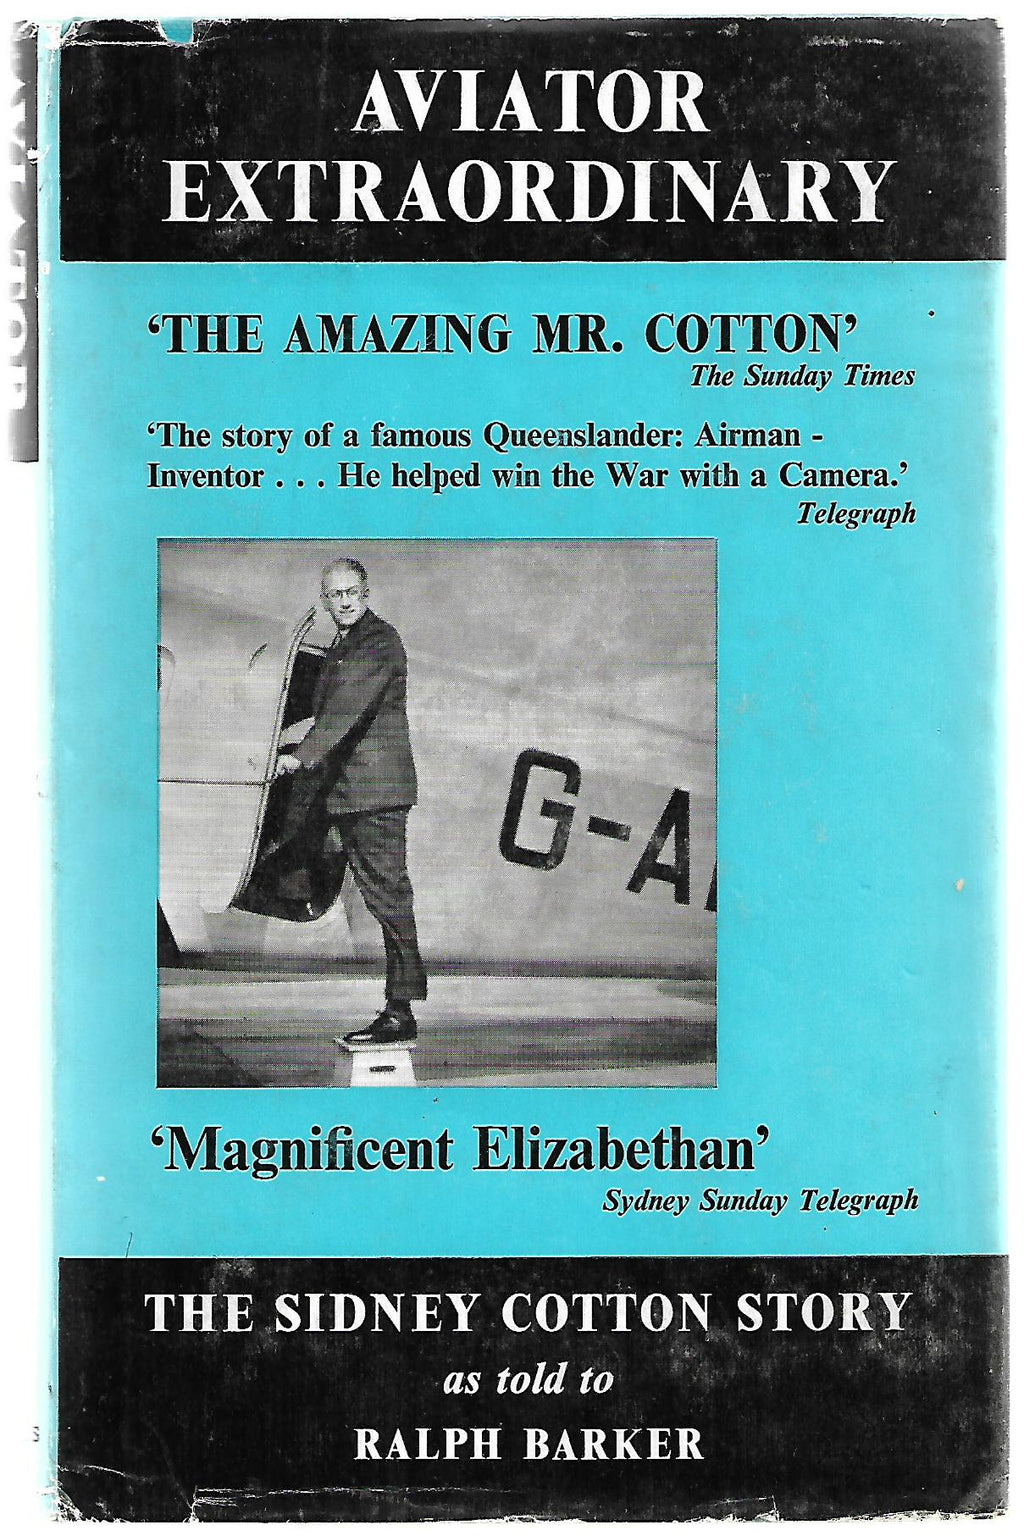 Aviator Extraordinary: The Sydney Cotton Story - by Ralph Barker. [First Edition]